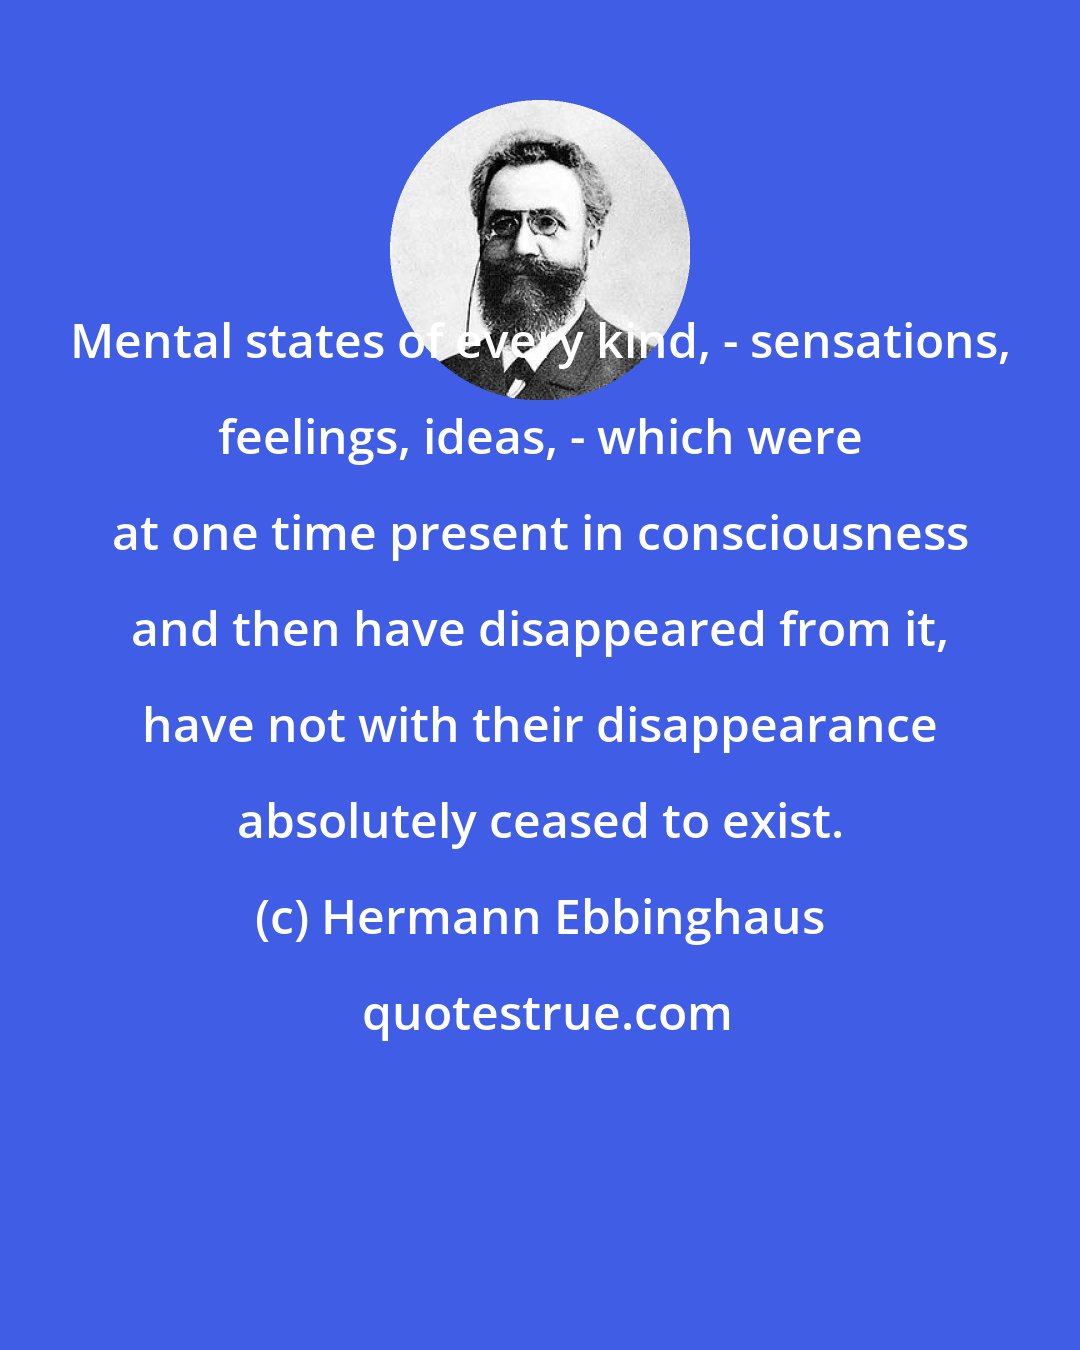 Hermann Ebbinghaus: Mental states of every kind, - sensations, feelings, ideas, - which were at one time present in consciousness and then have disappeared from it, have not with their disappearance absolutely ceased to exist.